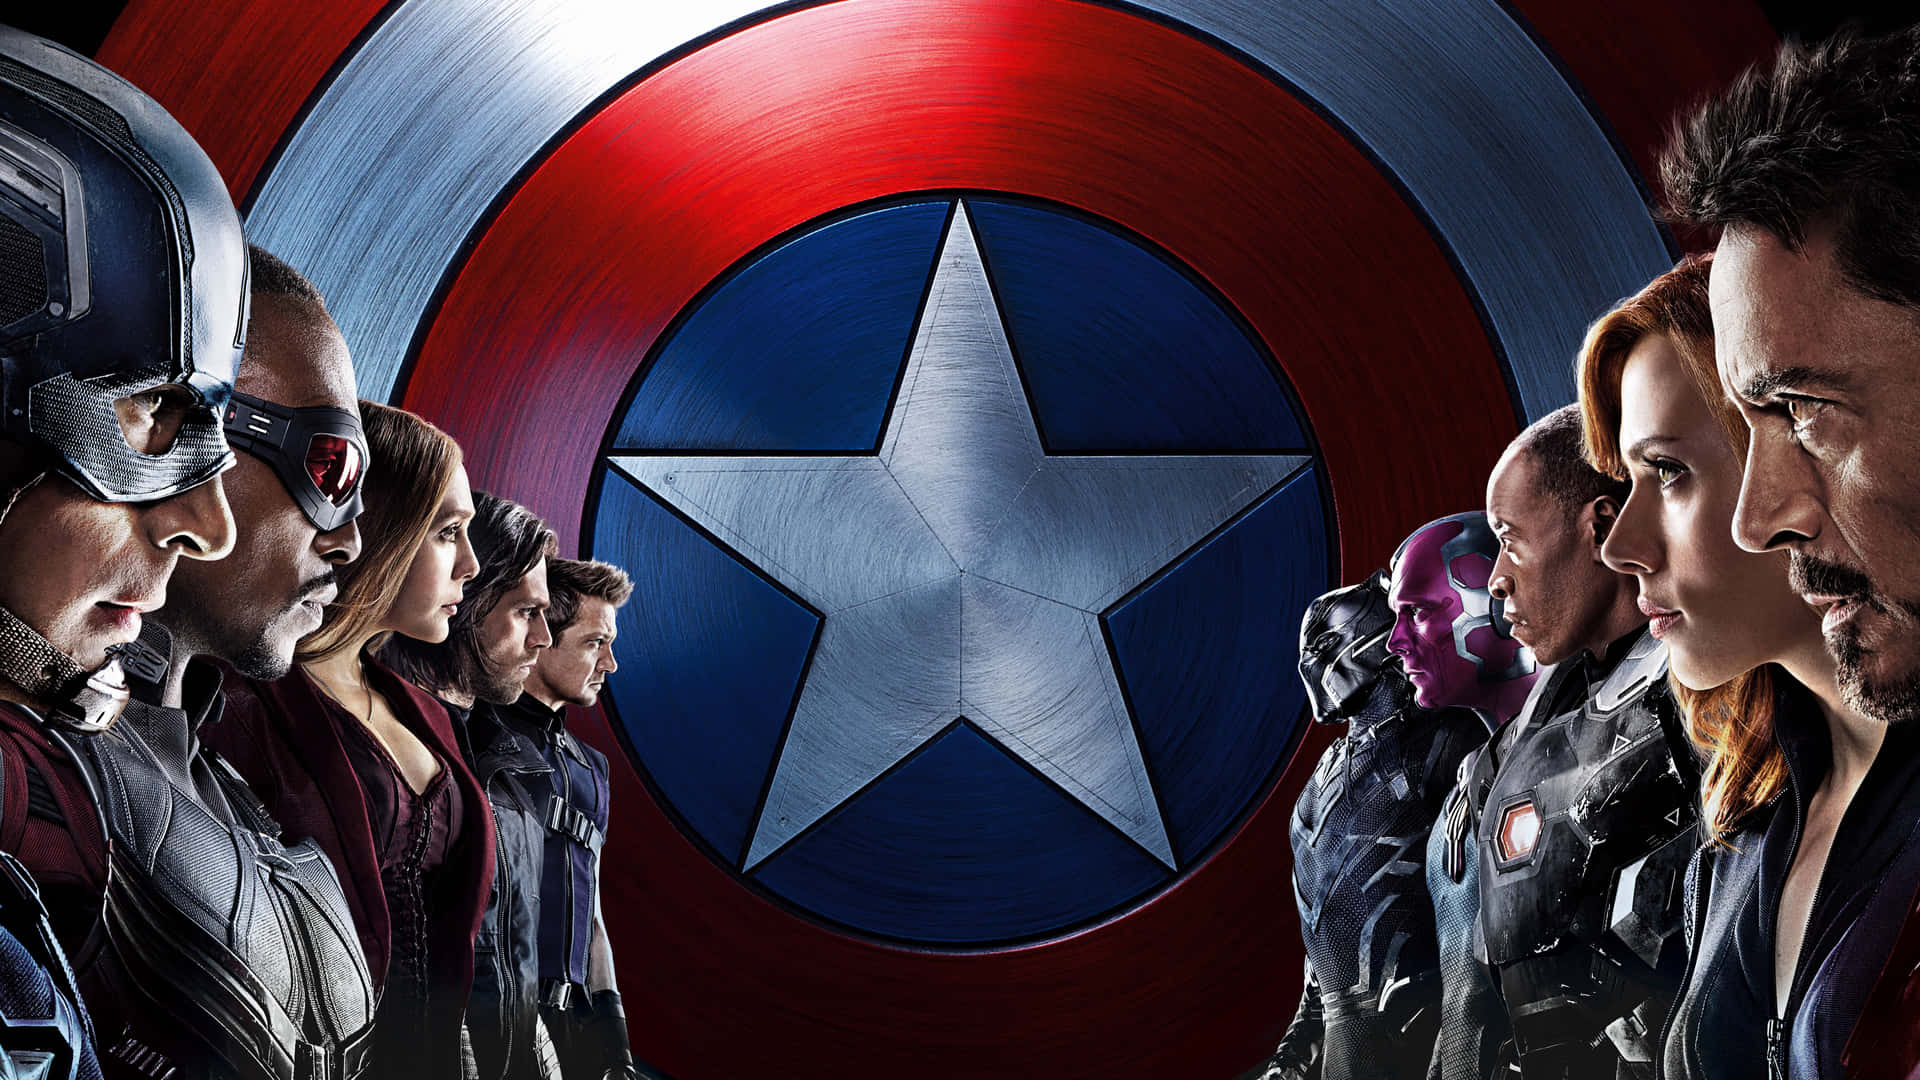 Embrace your patriotic side with Captain America dual screen wallpaper. Wallpaper